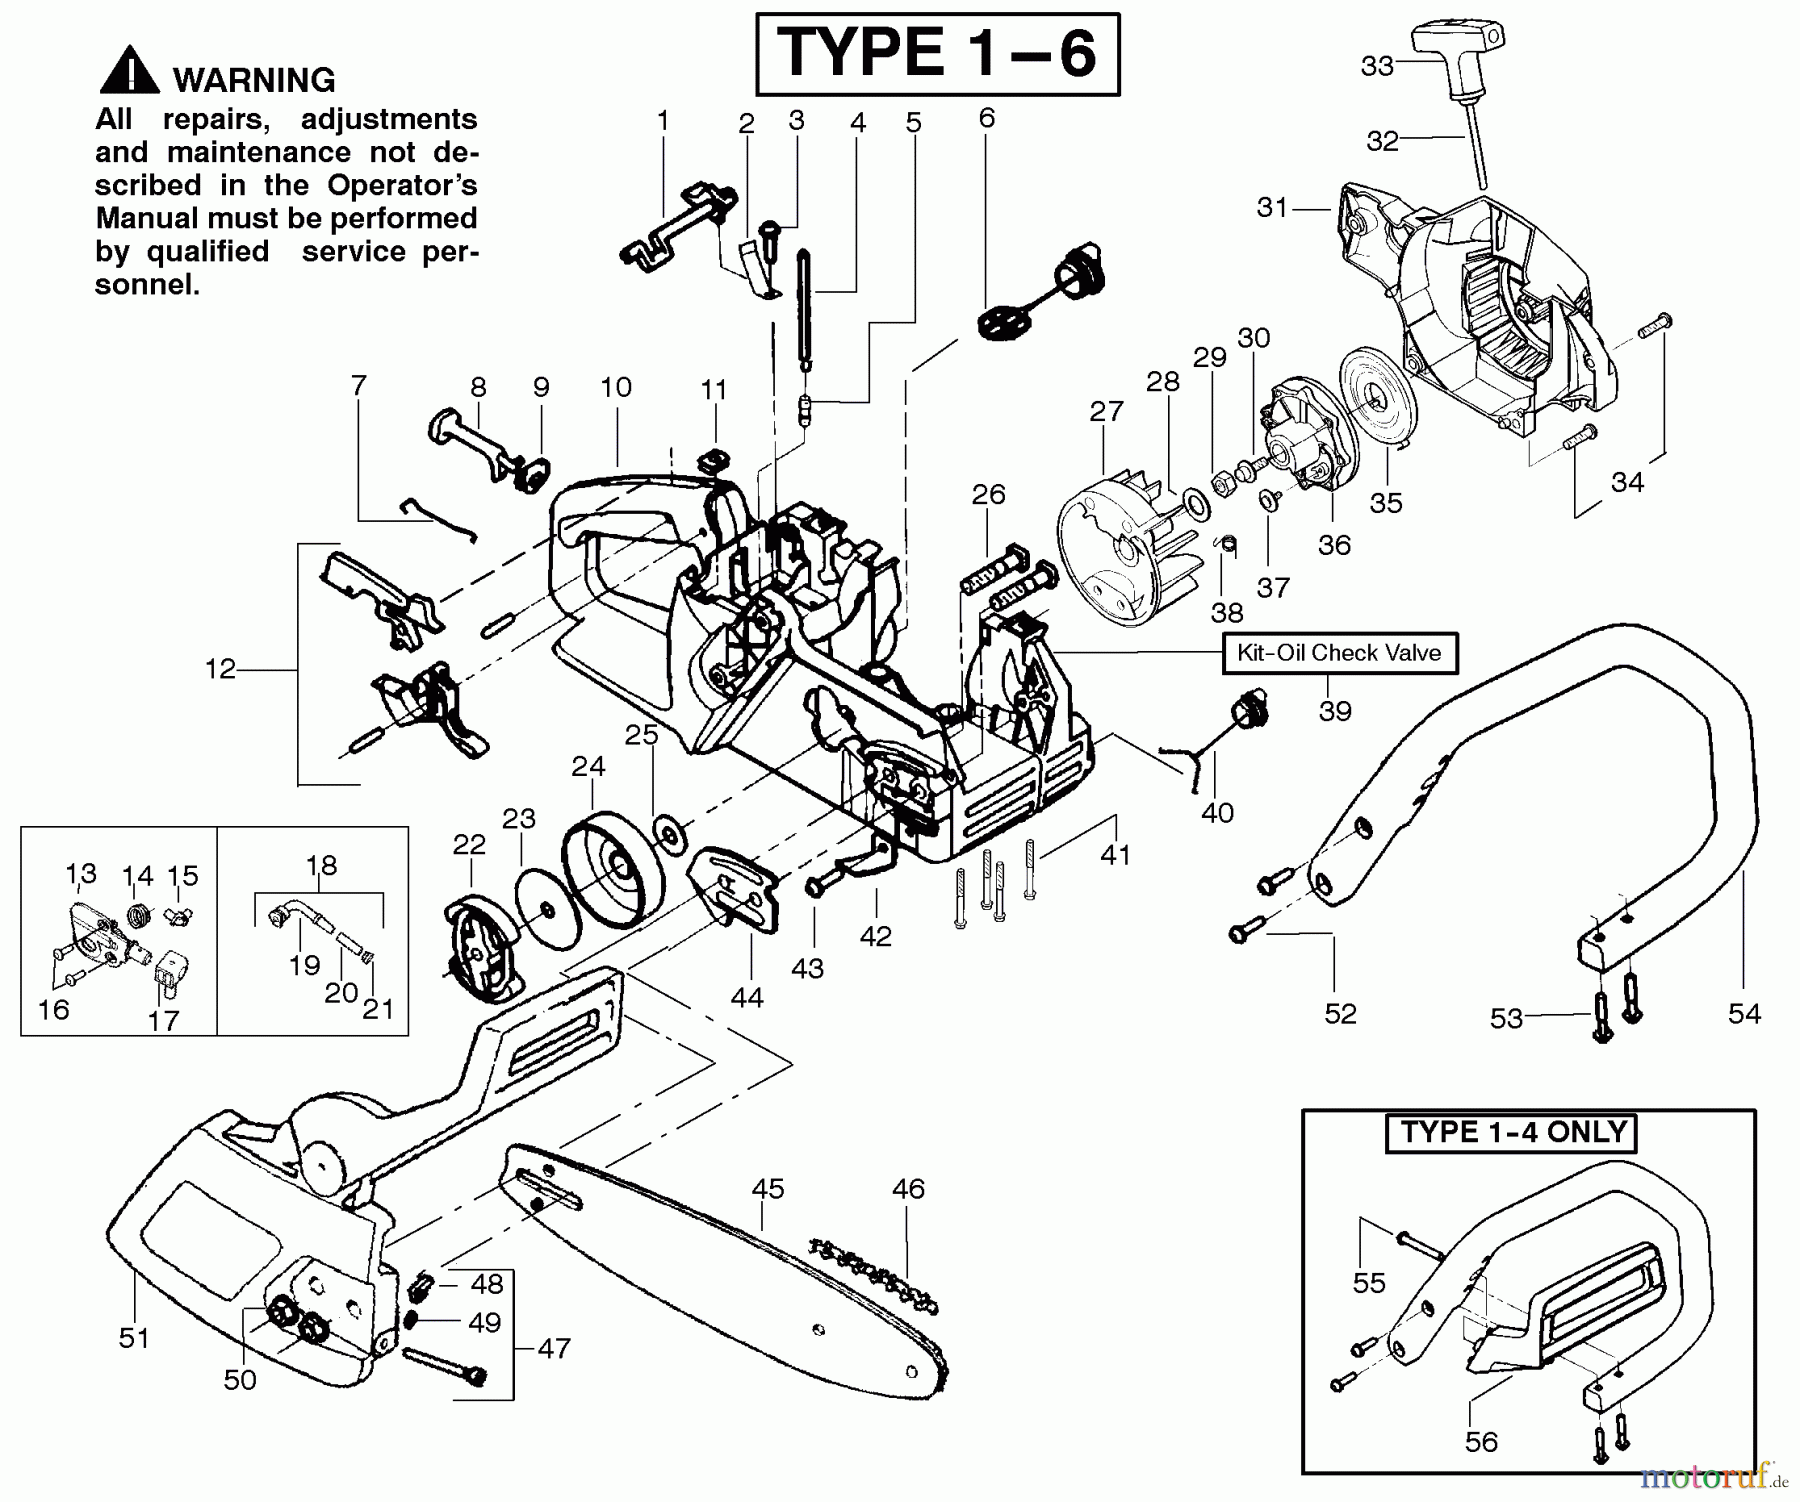  Poulan / Weed Eater Motorsägen 2050 (Type 6) - Poulan Pioneer Chainsaw Handle, Chassis & Bar Assembly Type 1-6